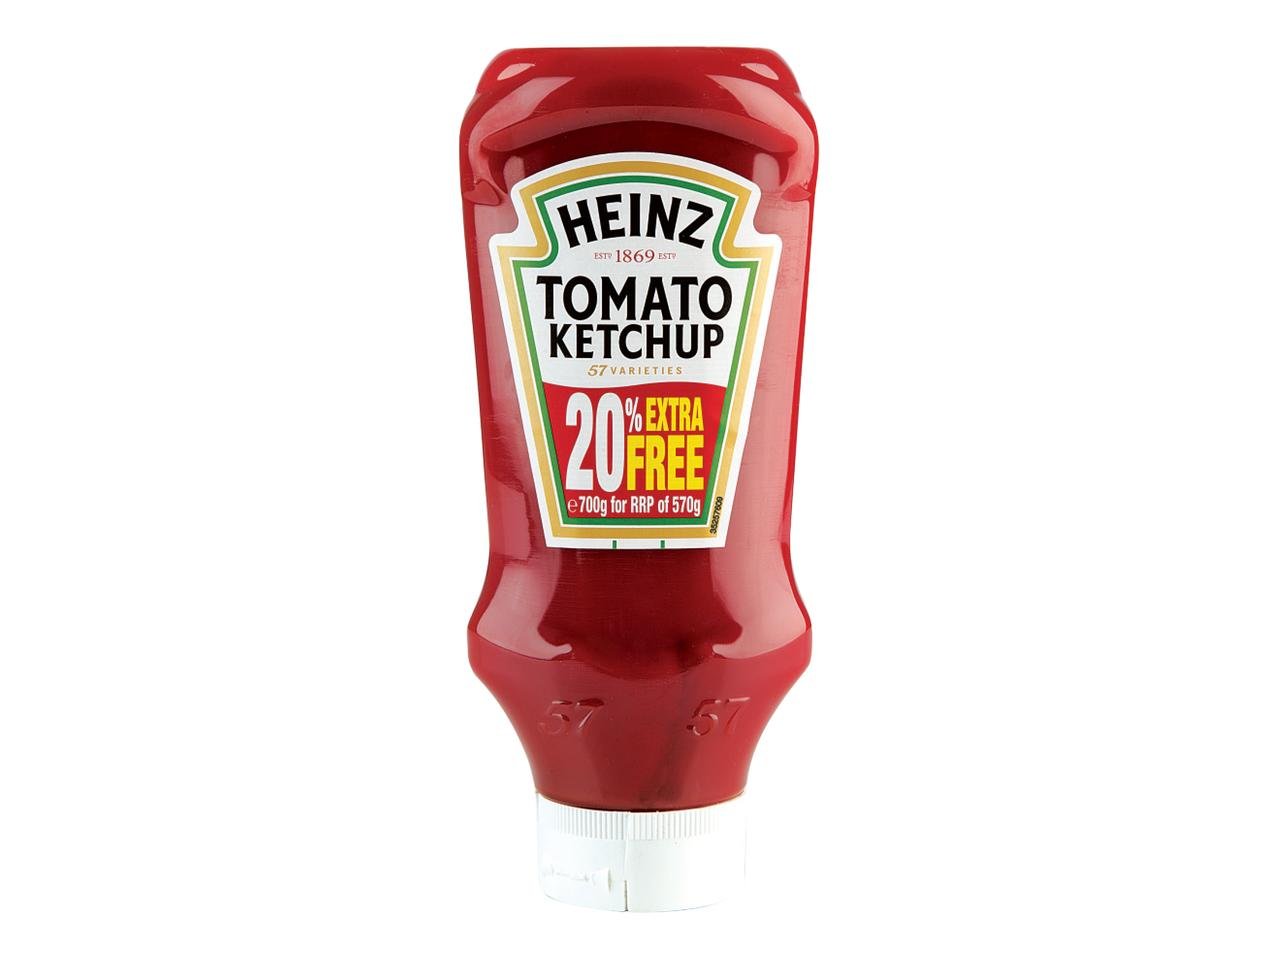 Tomato ketchup. Heinz Tomato Ketchup. "Ketchup ""Heinz"" Tomato 570g  ". Ketchup "Heinz" Tomato, 550 g. 87157239|Heinz Ketchup tomate 570g.